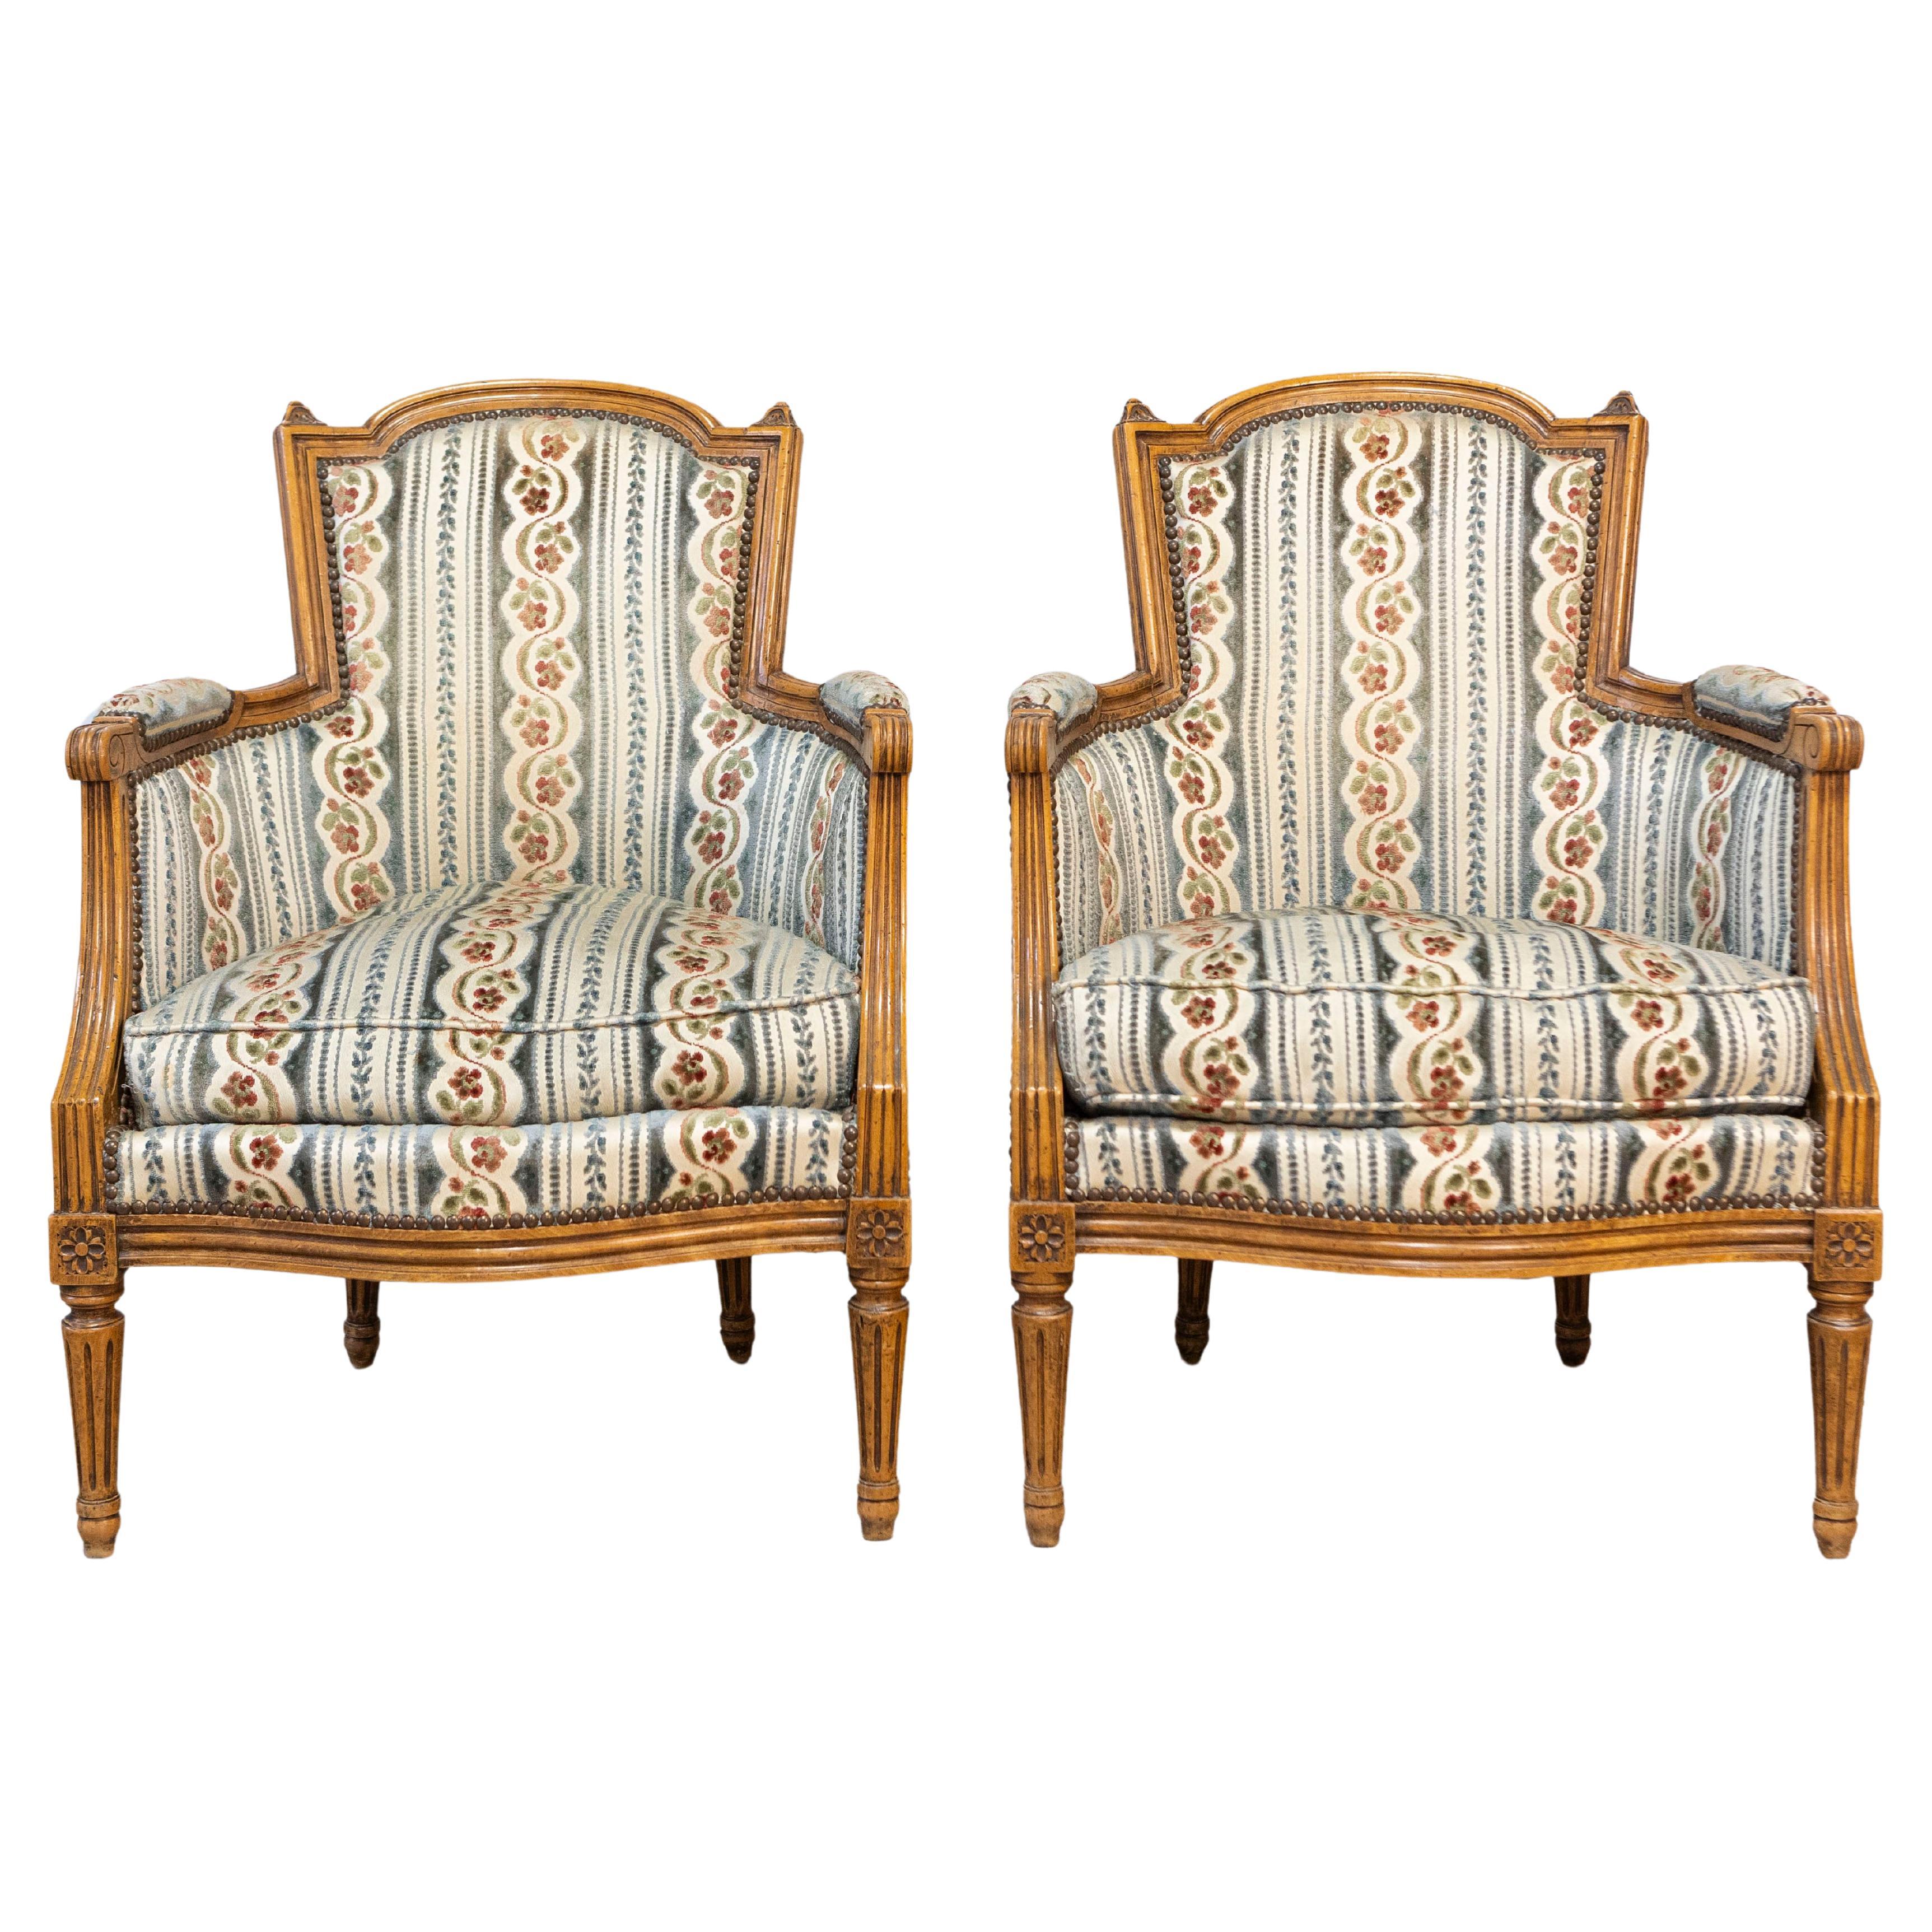 Pair of French Louis XVI Style Walnut Bergères Chairs with Carved Fluted Legs For Sale